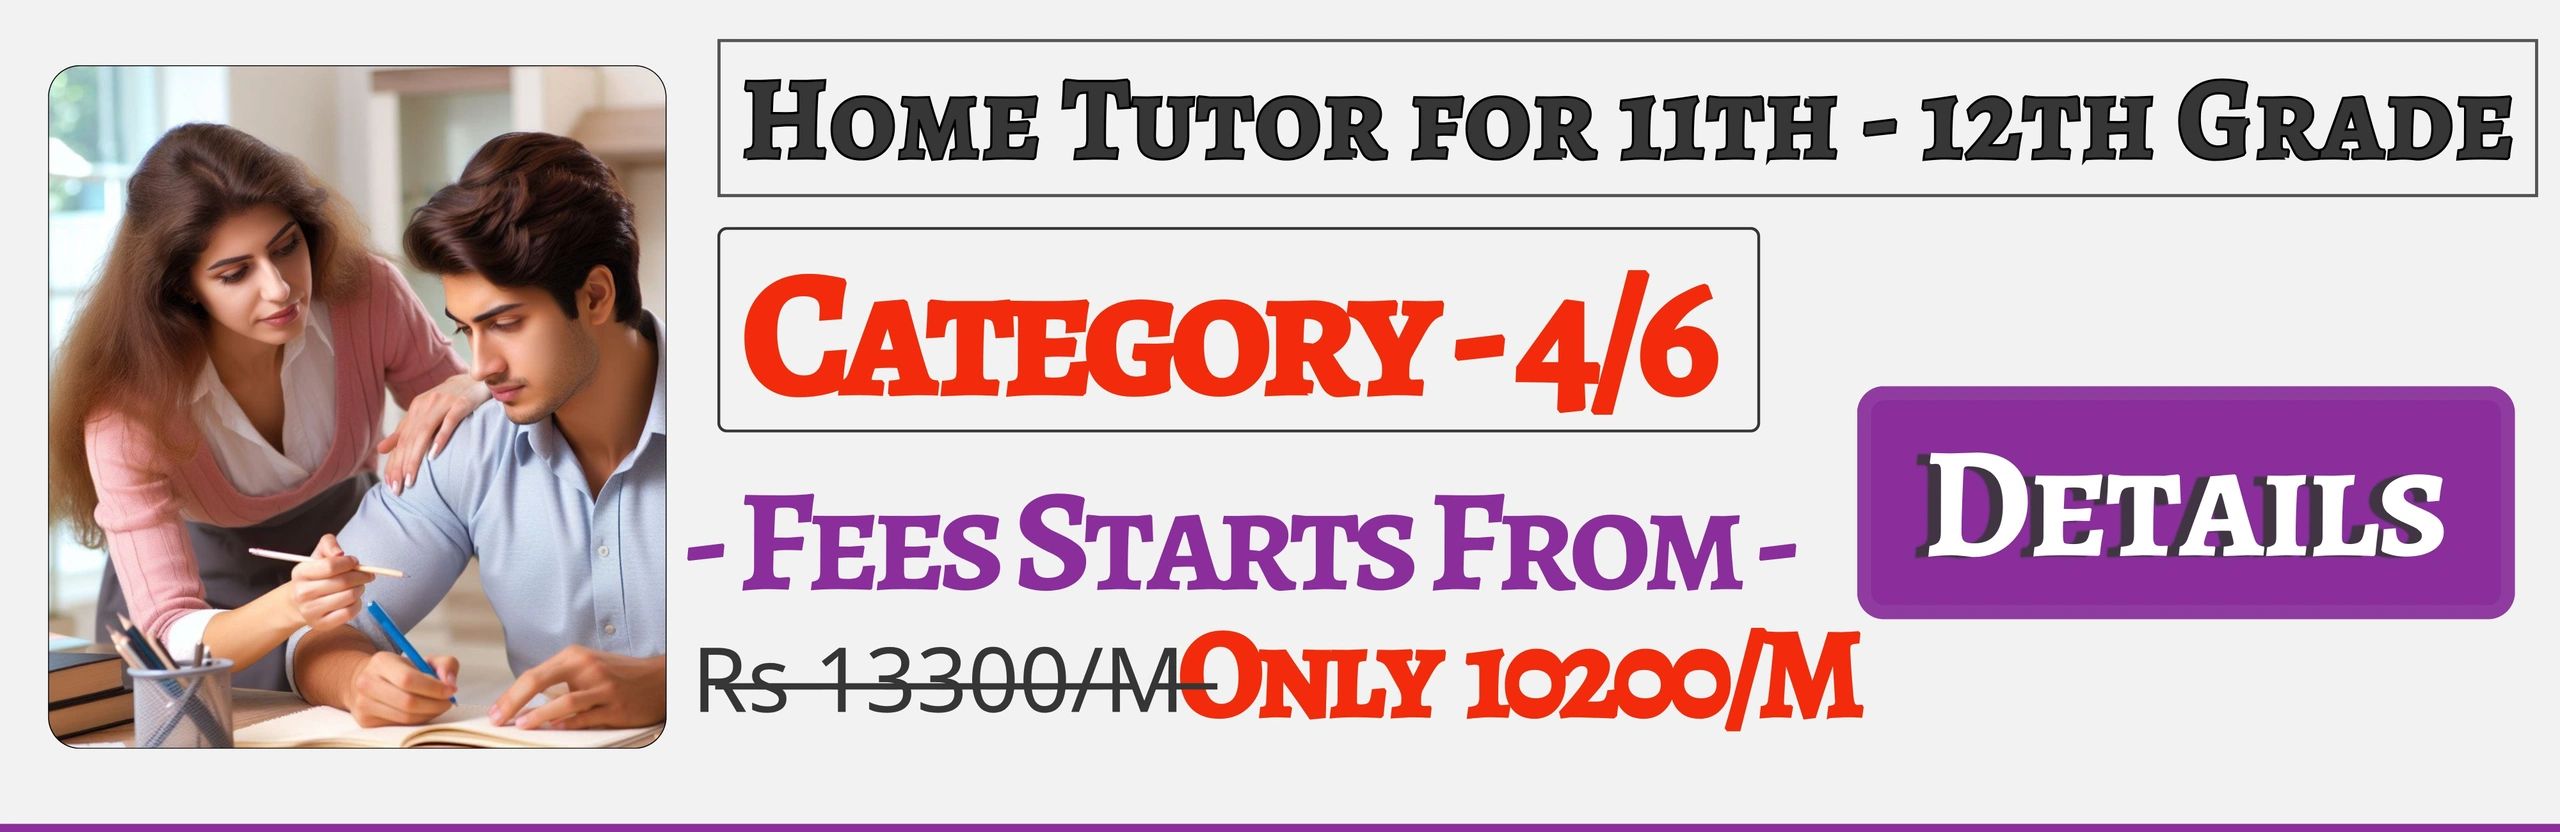 Book Best Home Tuition Tutors For 11th & 12th In Jaipur , Fees Only 10200/M